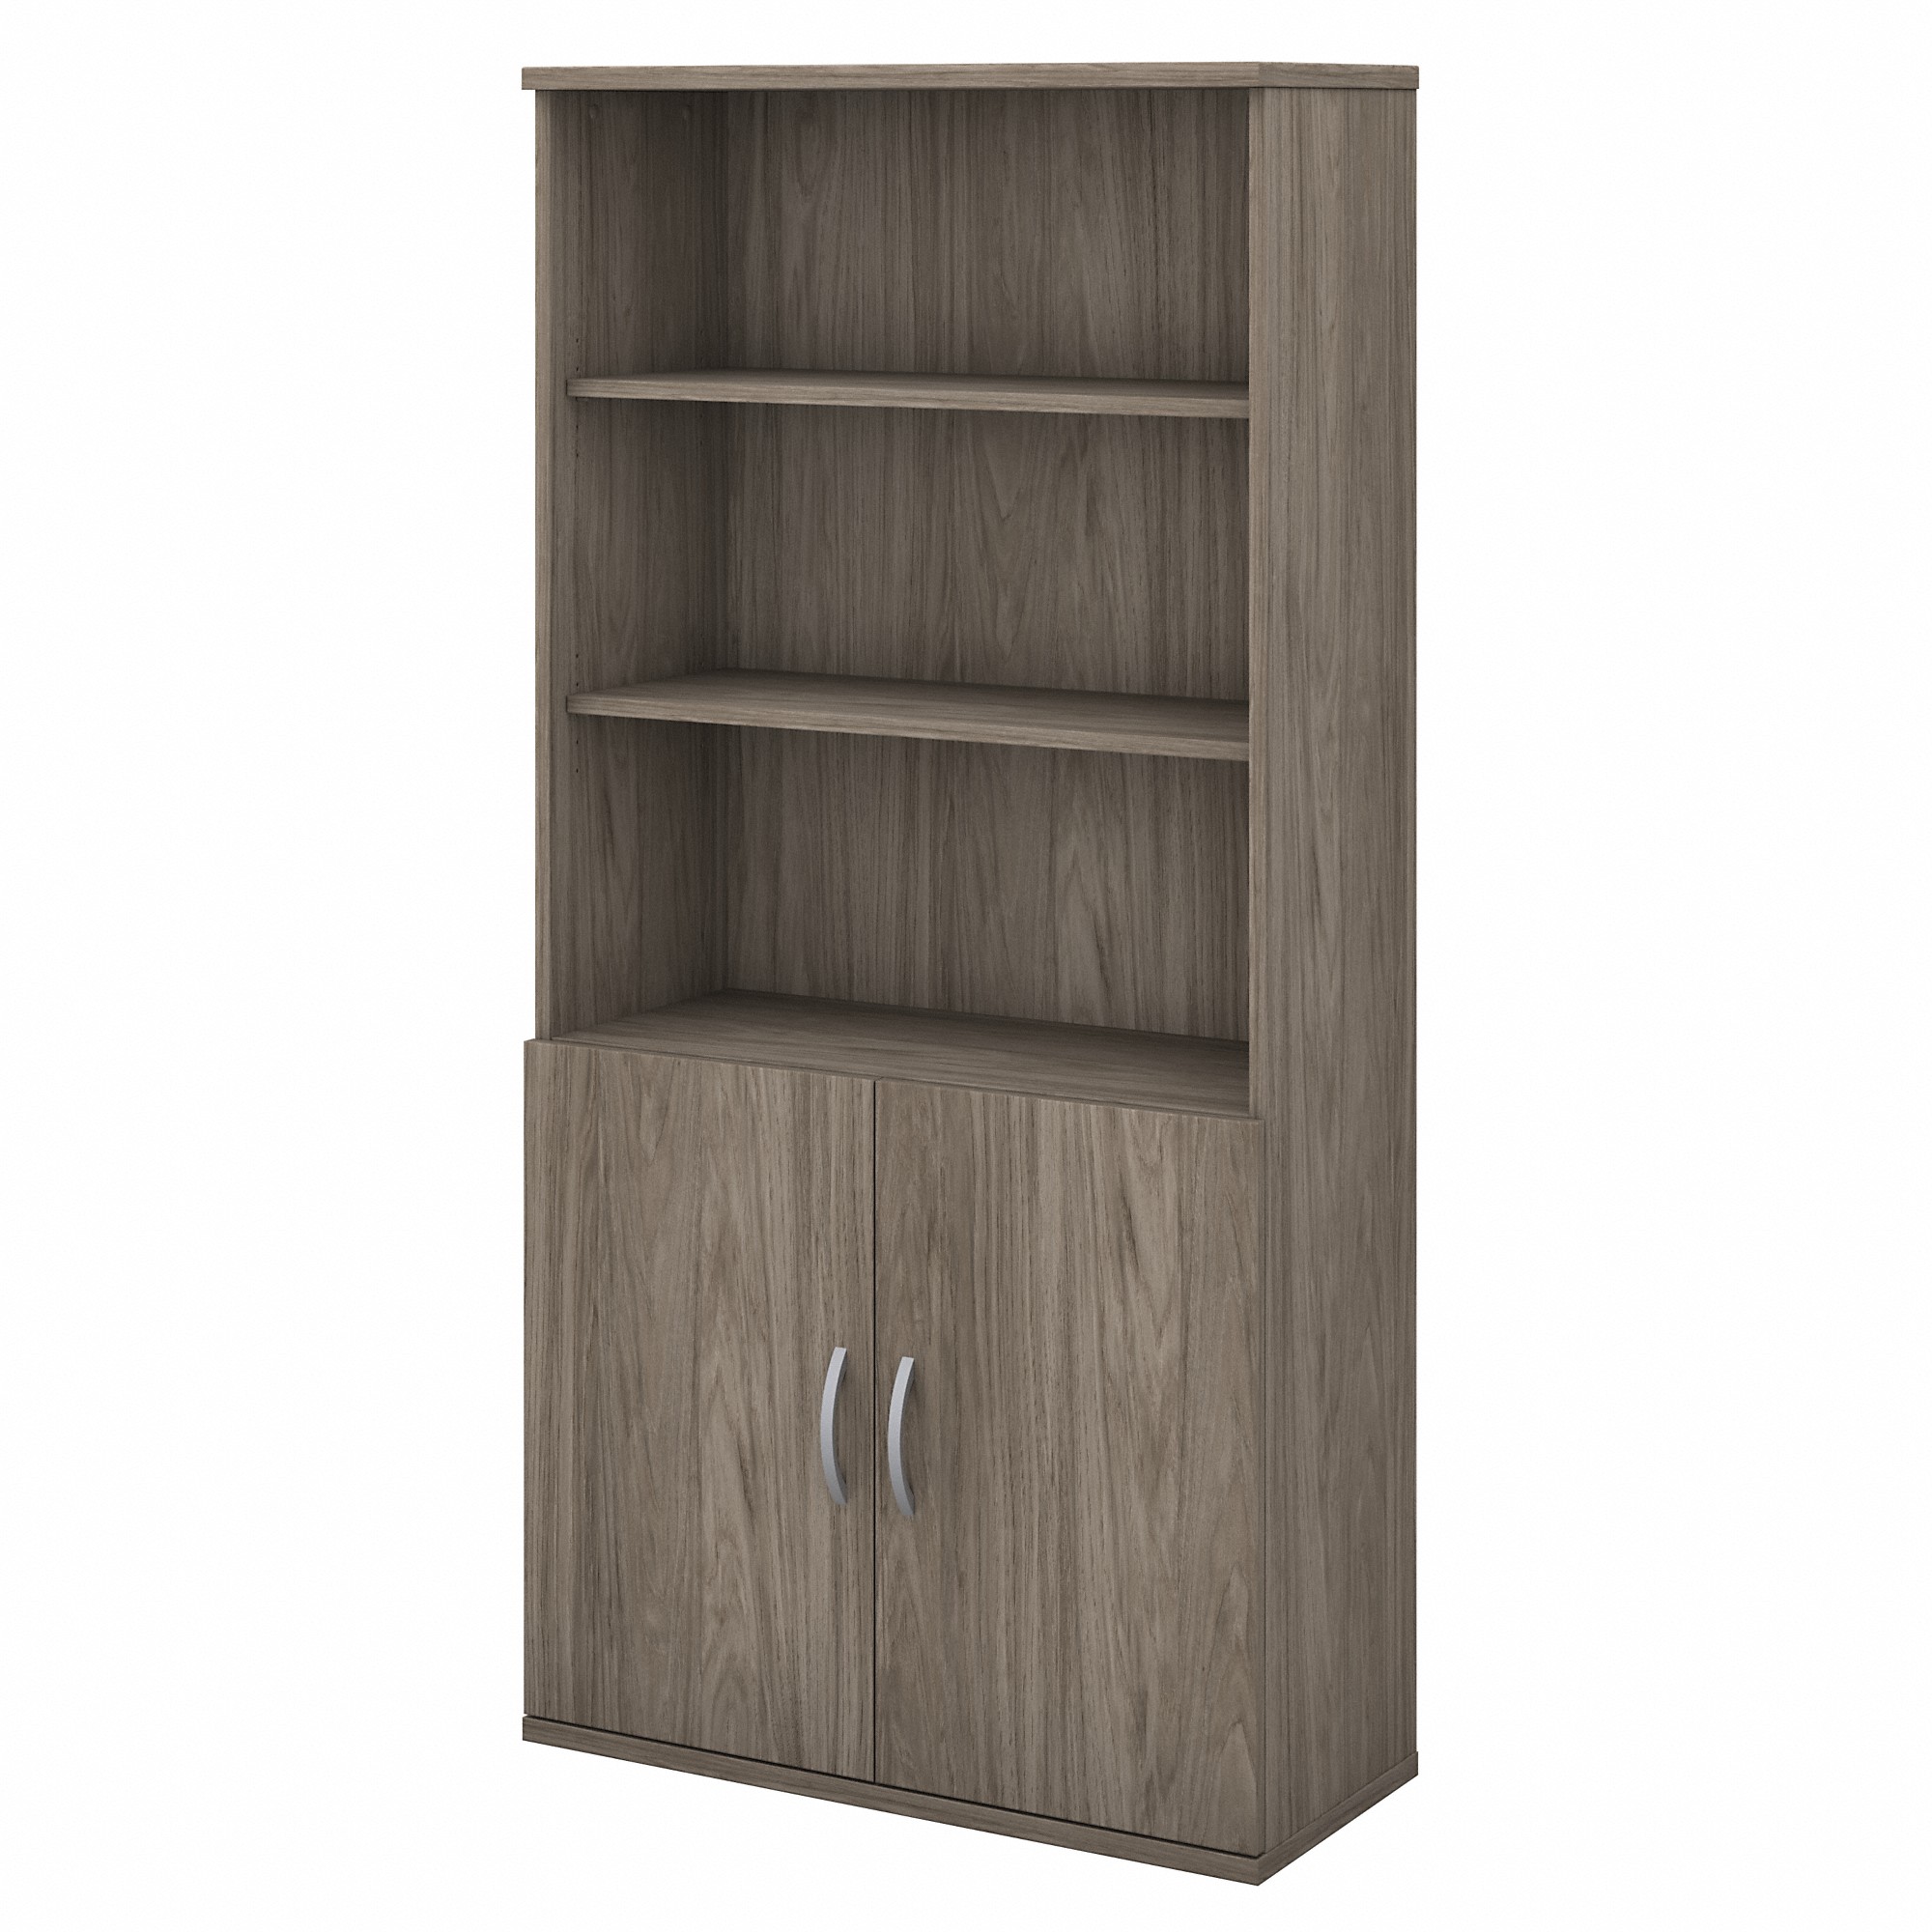 Bush Business Furniture Studio C Tall 5 Shelf Bookcase with Doors in Modern Hickory - Bush Business Furniture STC015MH